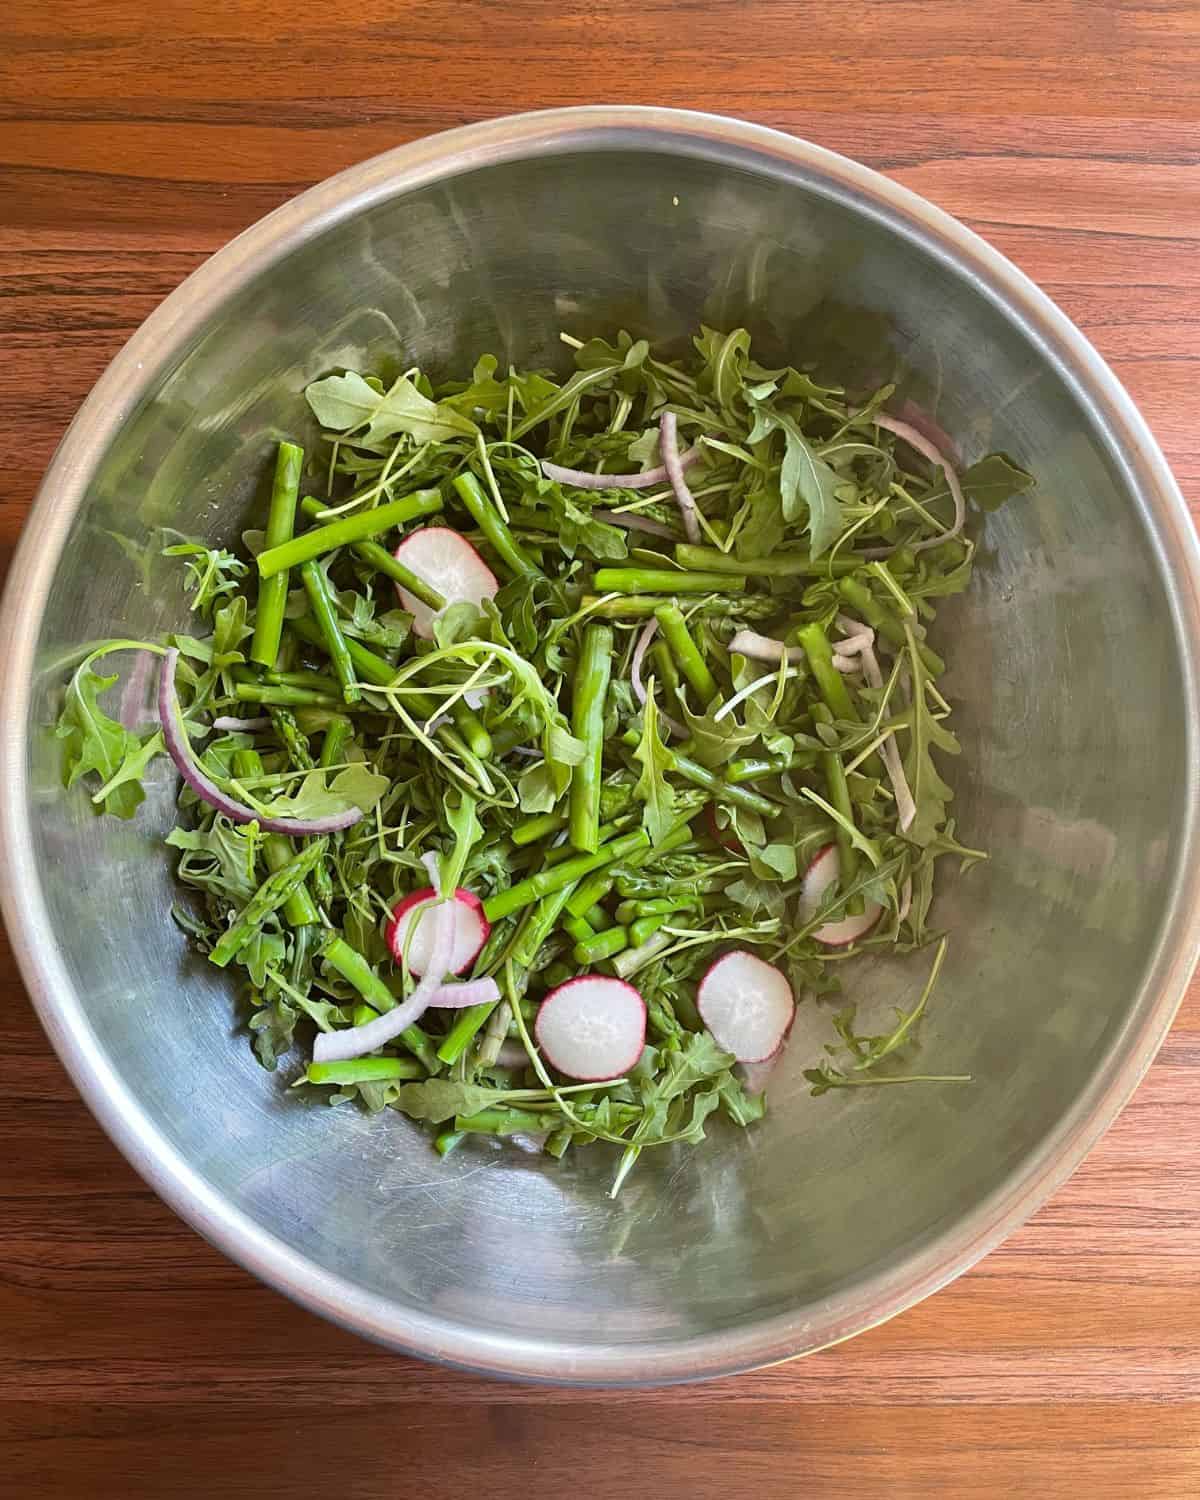 Arugula, sliced radishes, cooked asparagus, and sliced red onion in a large mixing bowl.